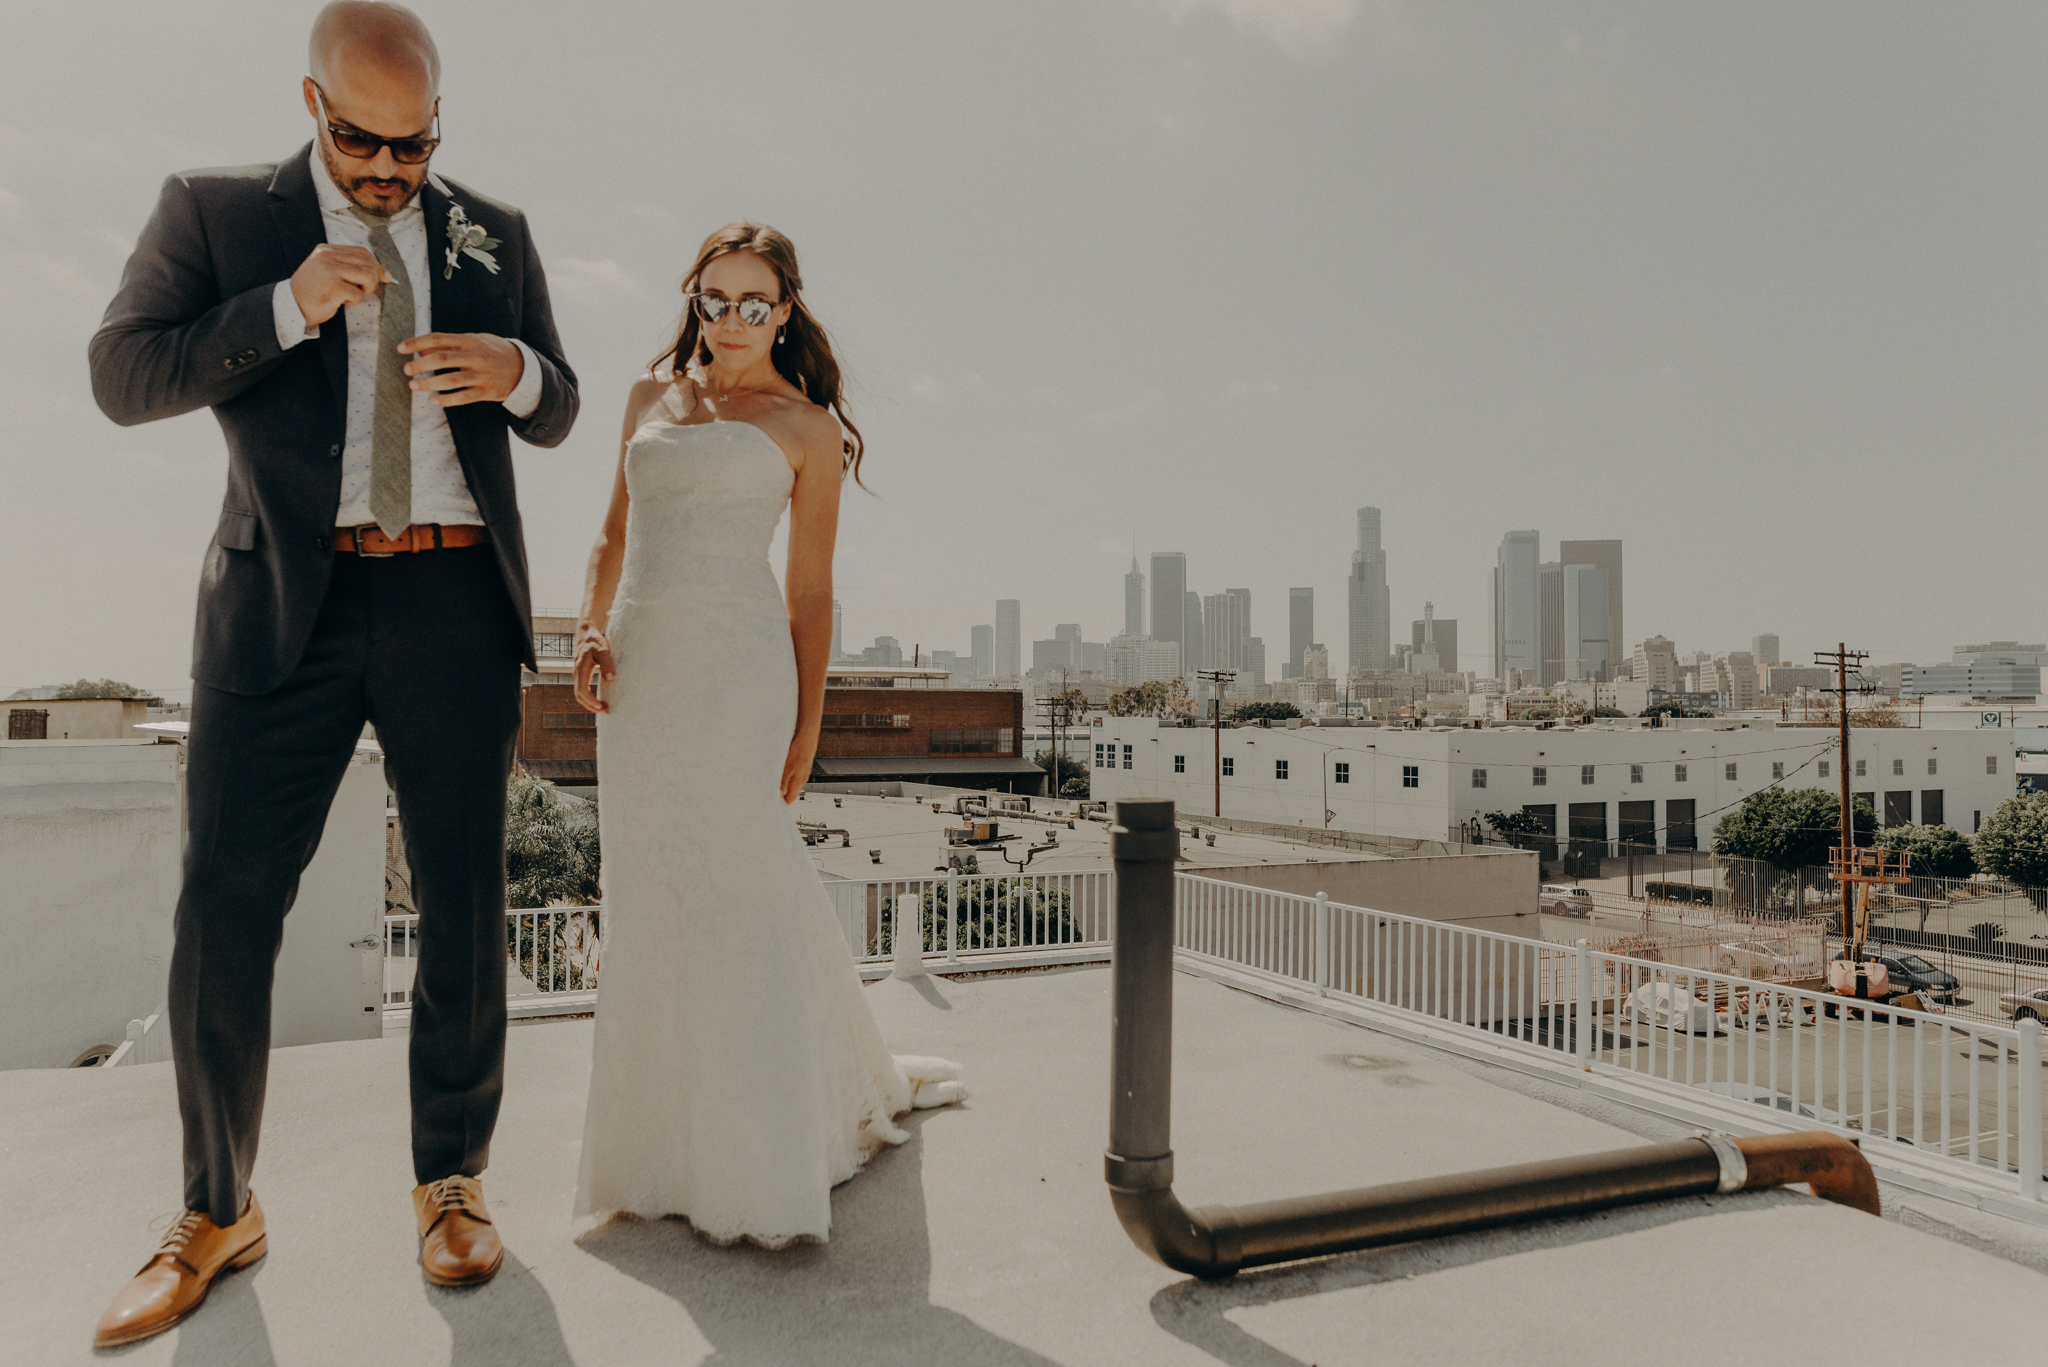 The Unique Space Wedding Photographer - Los Angeles Wedding Photography - IsaiahAndTaylor.com-062.jpg